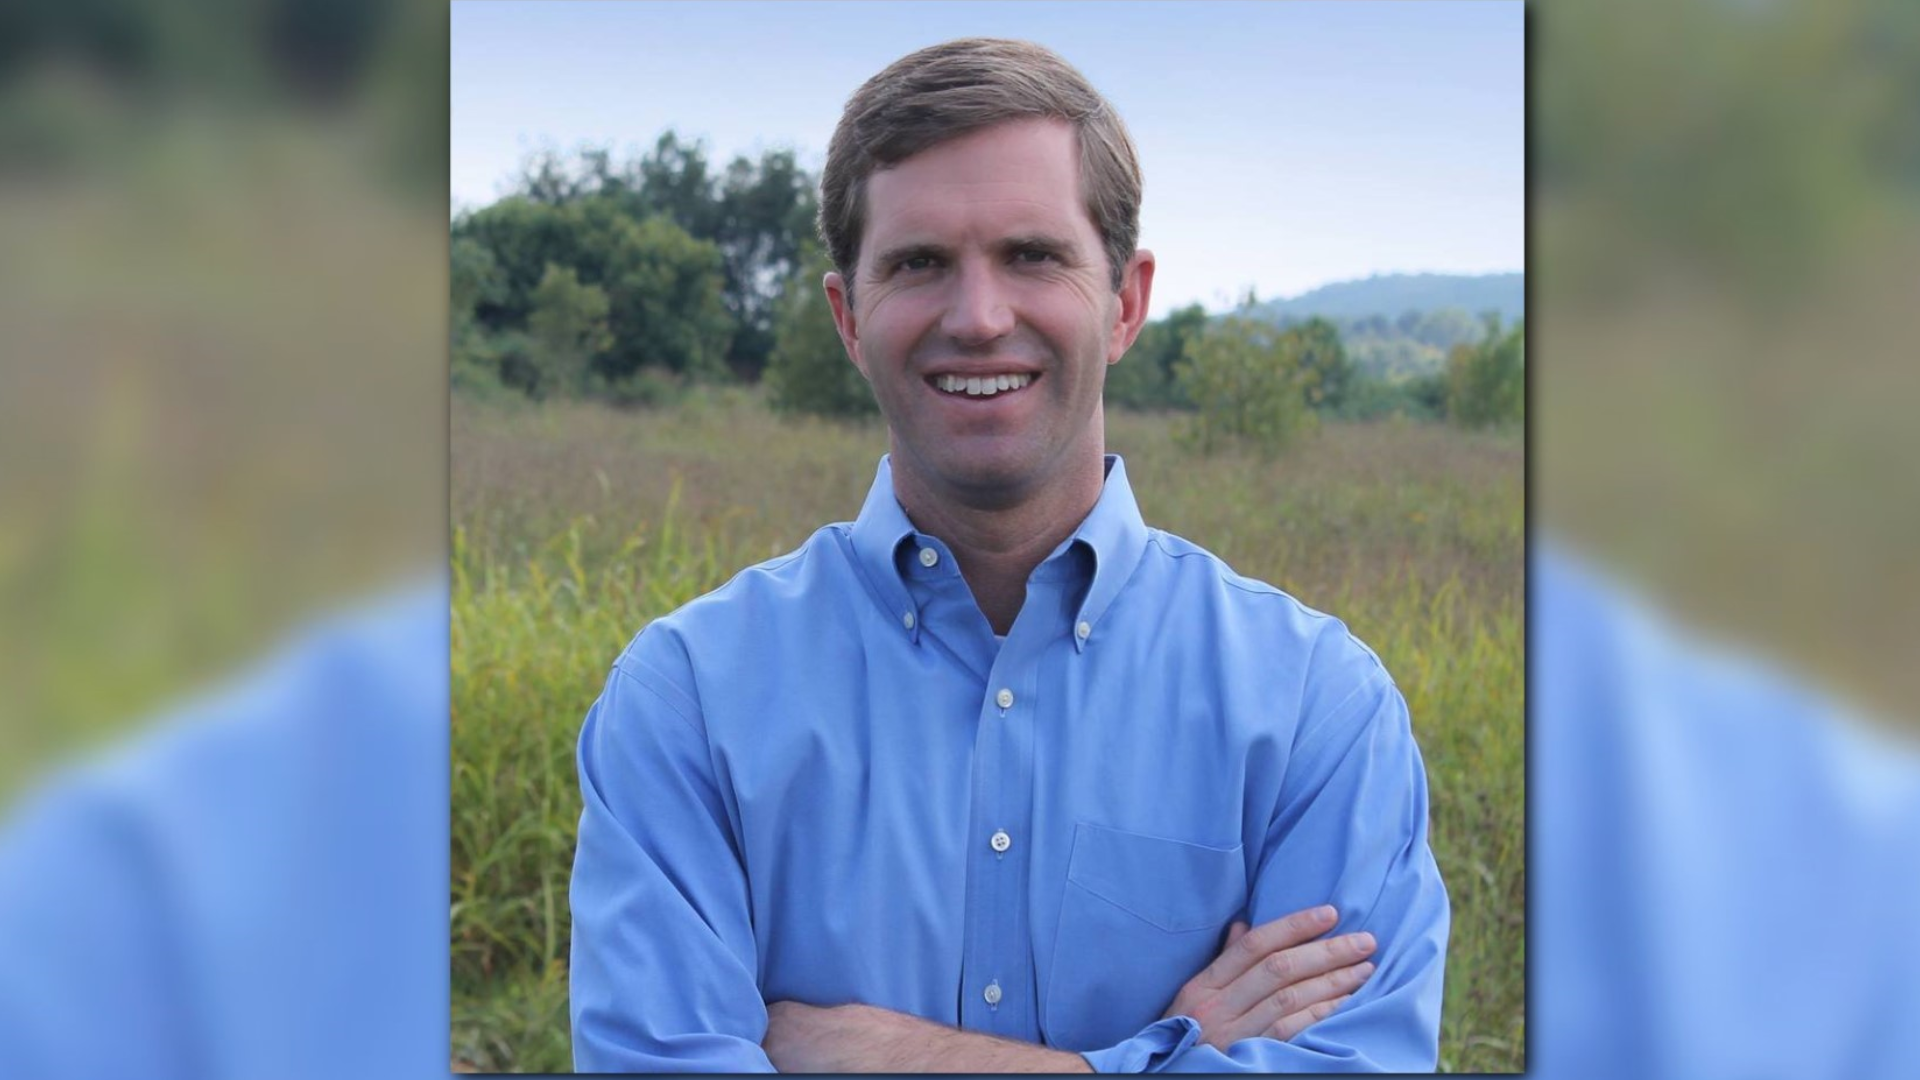 Democrat Andy Beshear will face Republican incumbent Matt Bevin in the November general election for Kentucky's next Governor.